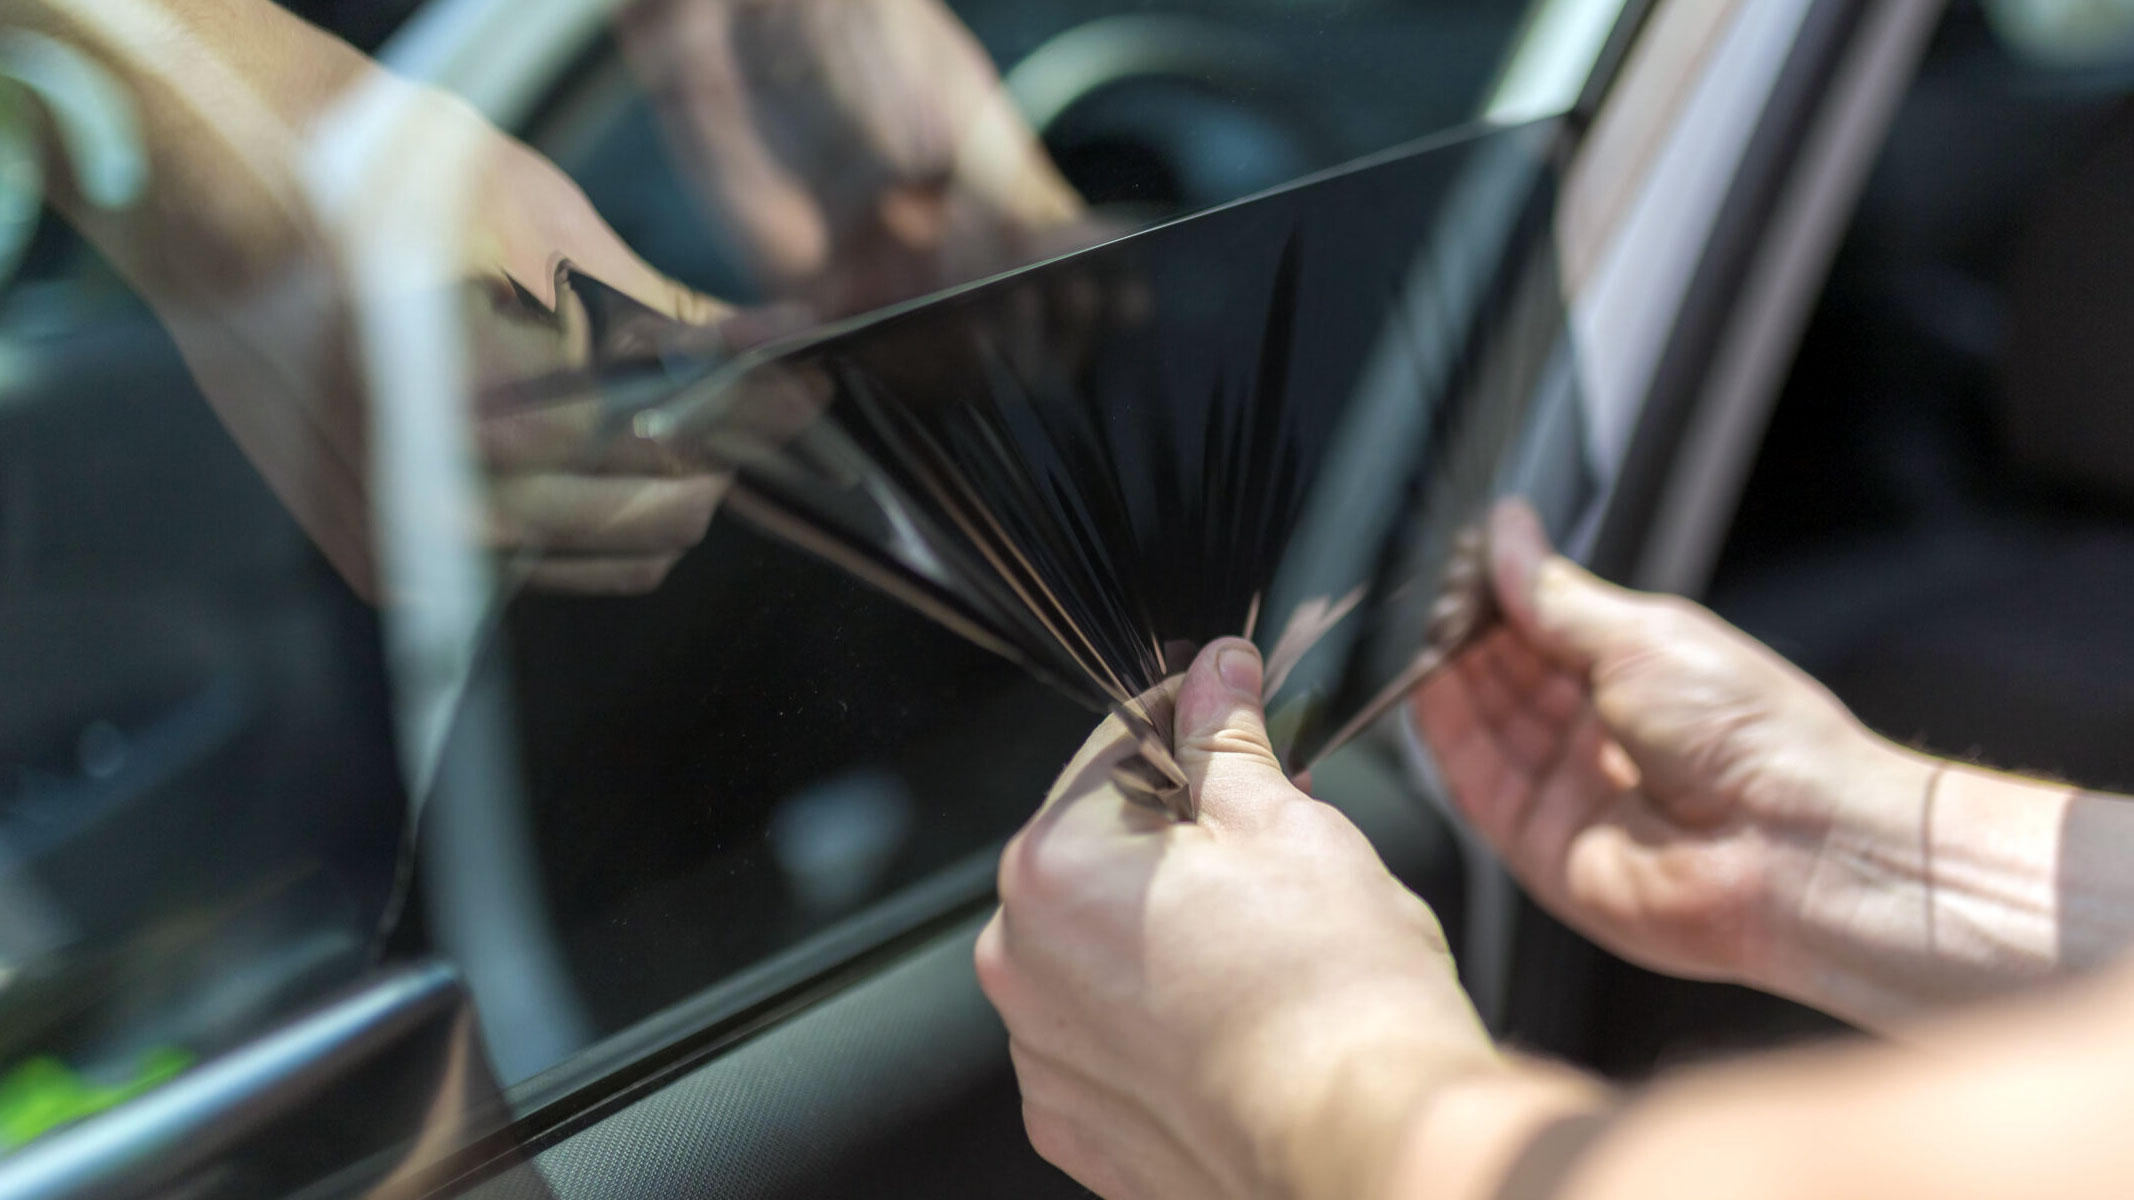 https://www.evercleartinting.com.au/wp-content/uploads/2023/07/How-to-remove-car-window-tint.jpg